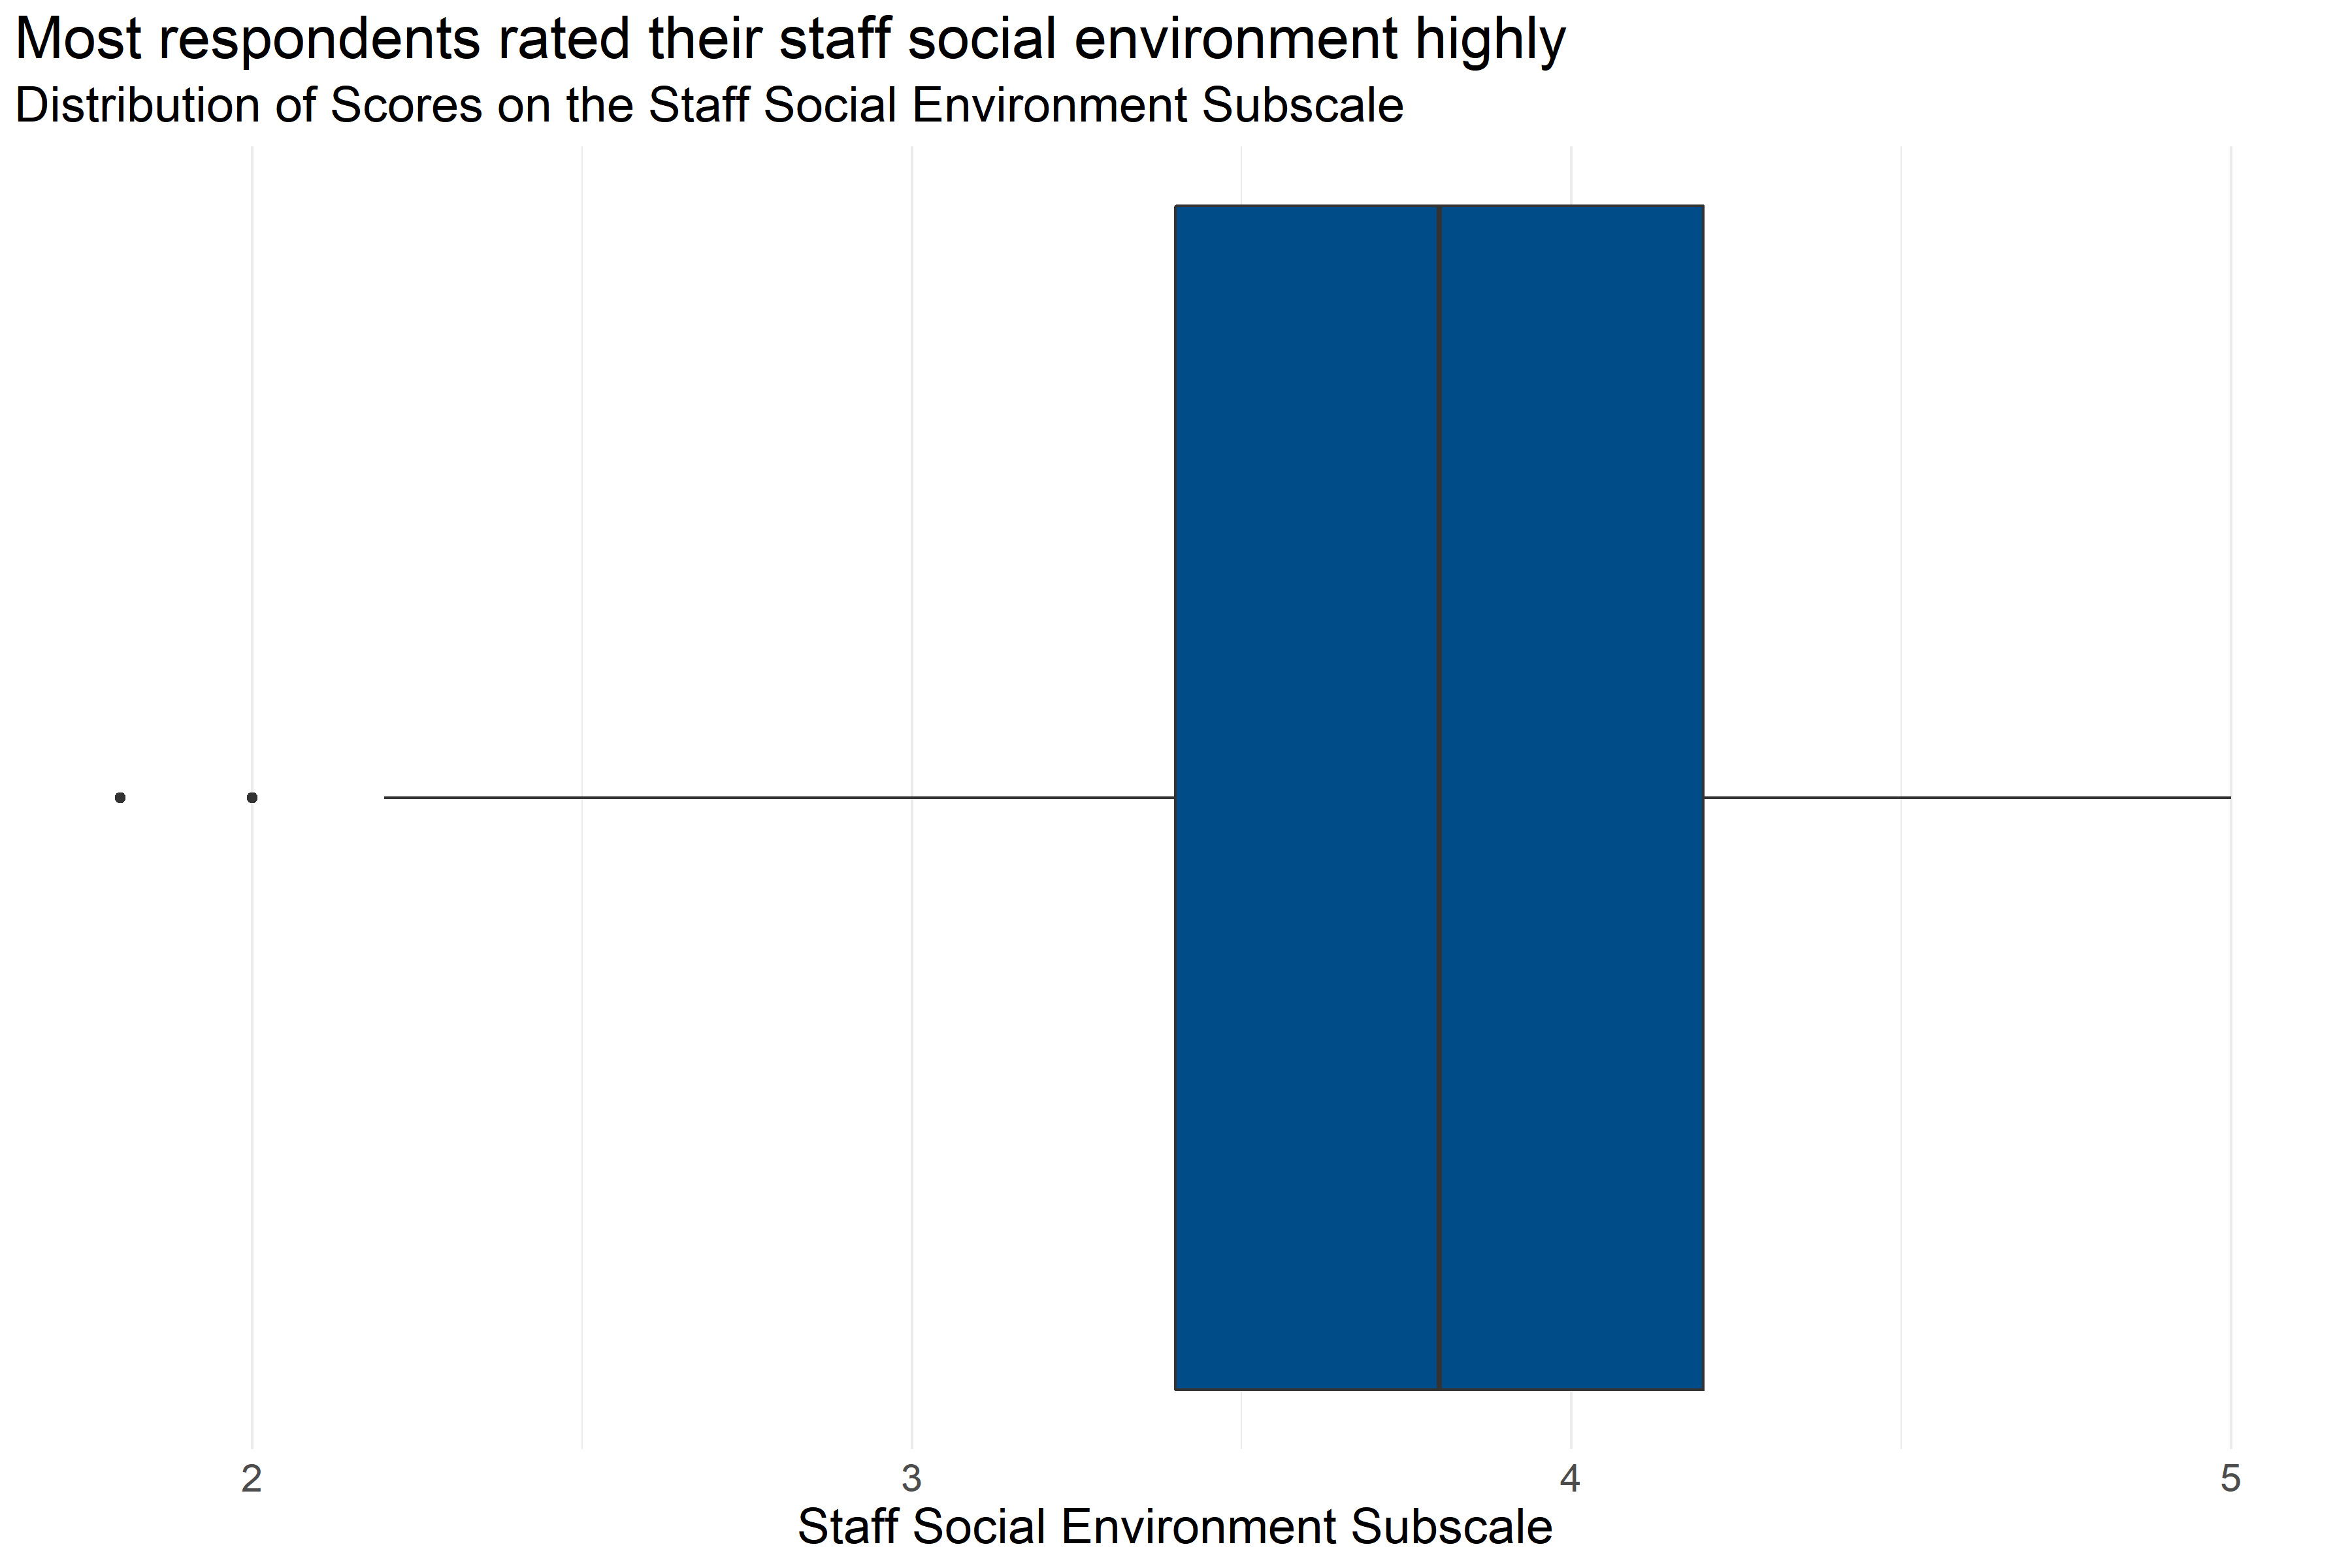 Boxplot of score distributions for the Staff Social Environment Subscale